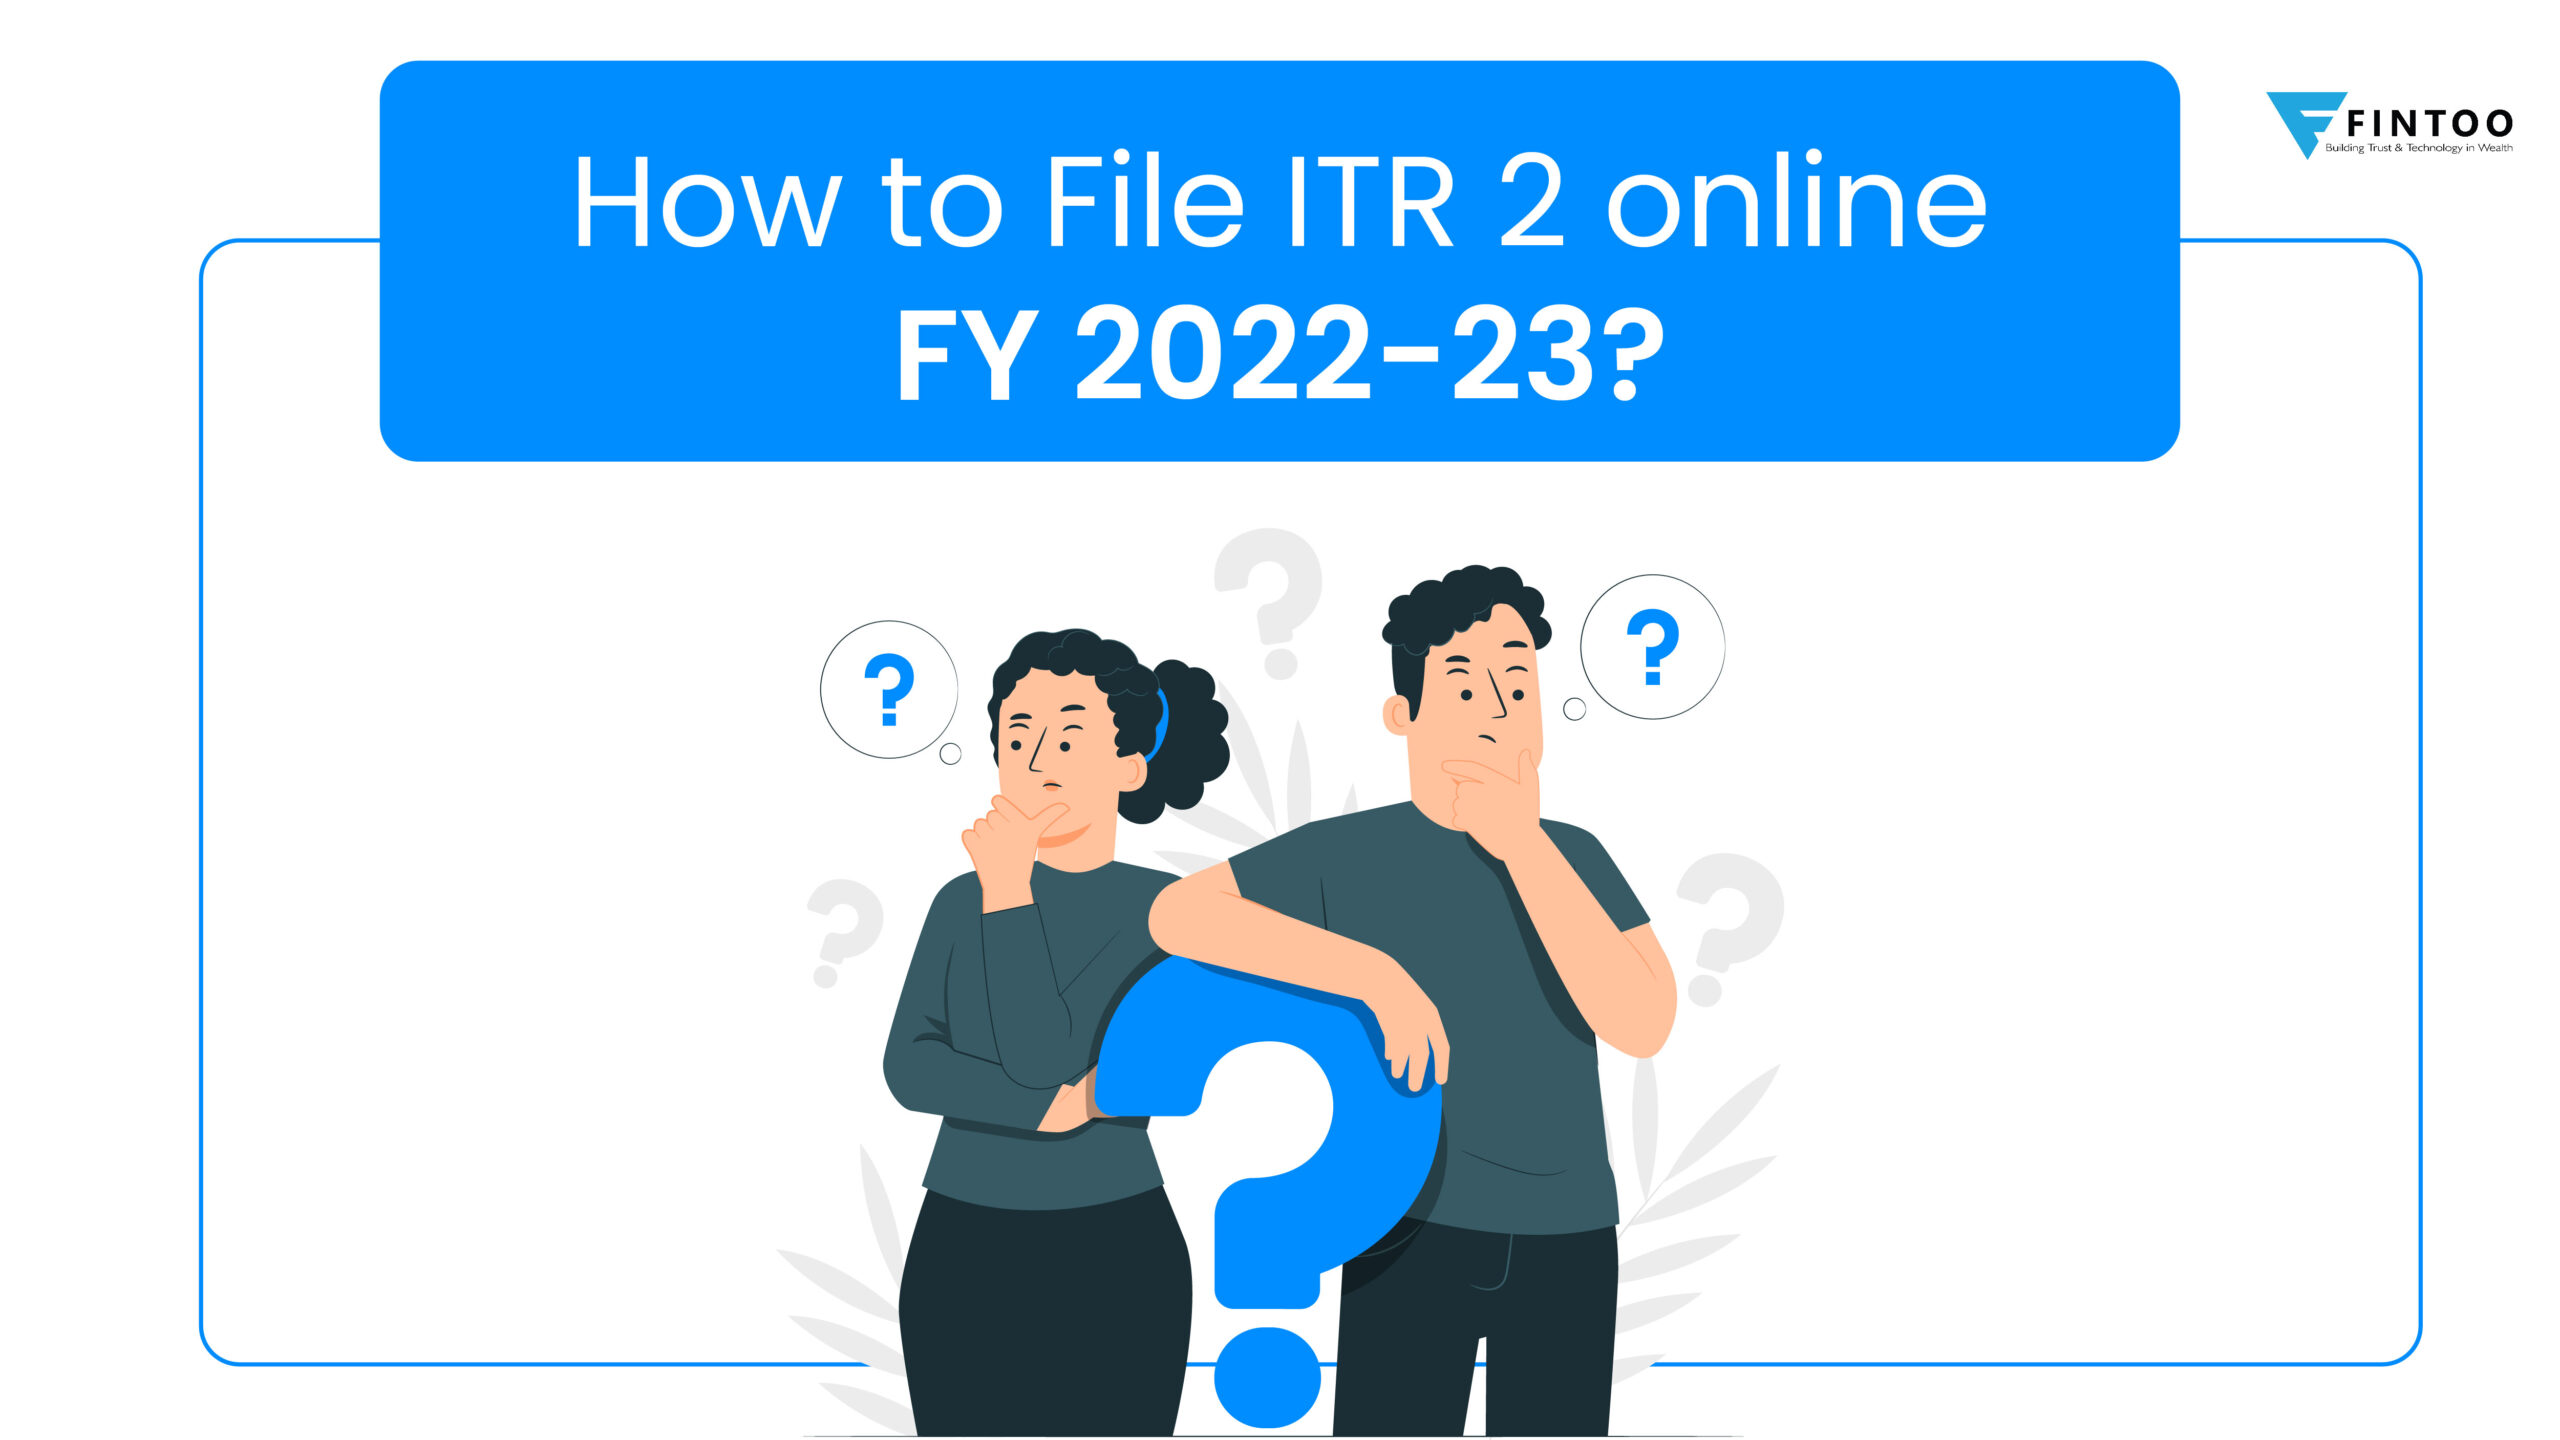 How to file ITR 2 online FY 2022-23